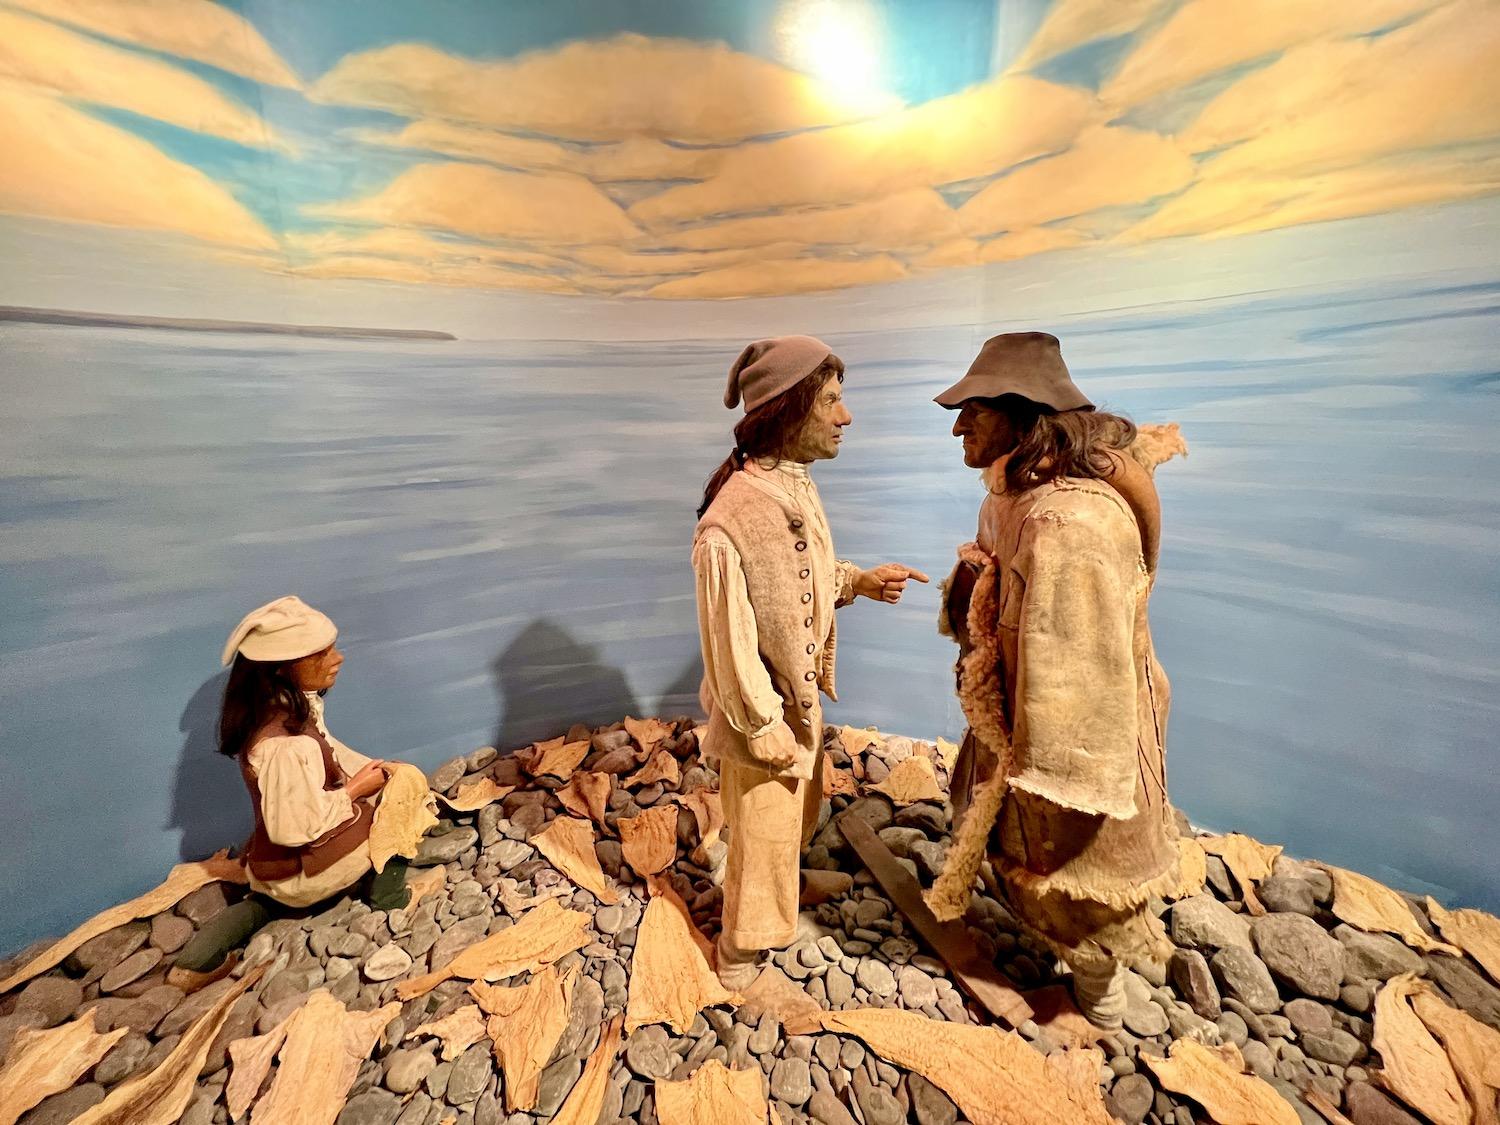 In Castle Hill's visitor center, there's real saltfish in this display showing French and Basque fishermen on the beach in what's now Placentia.